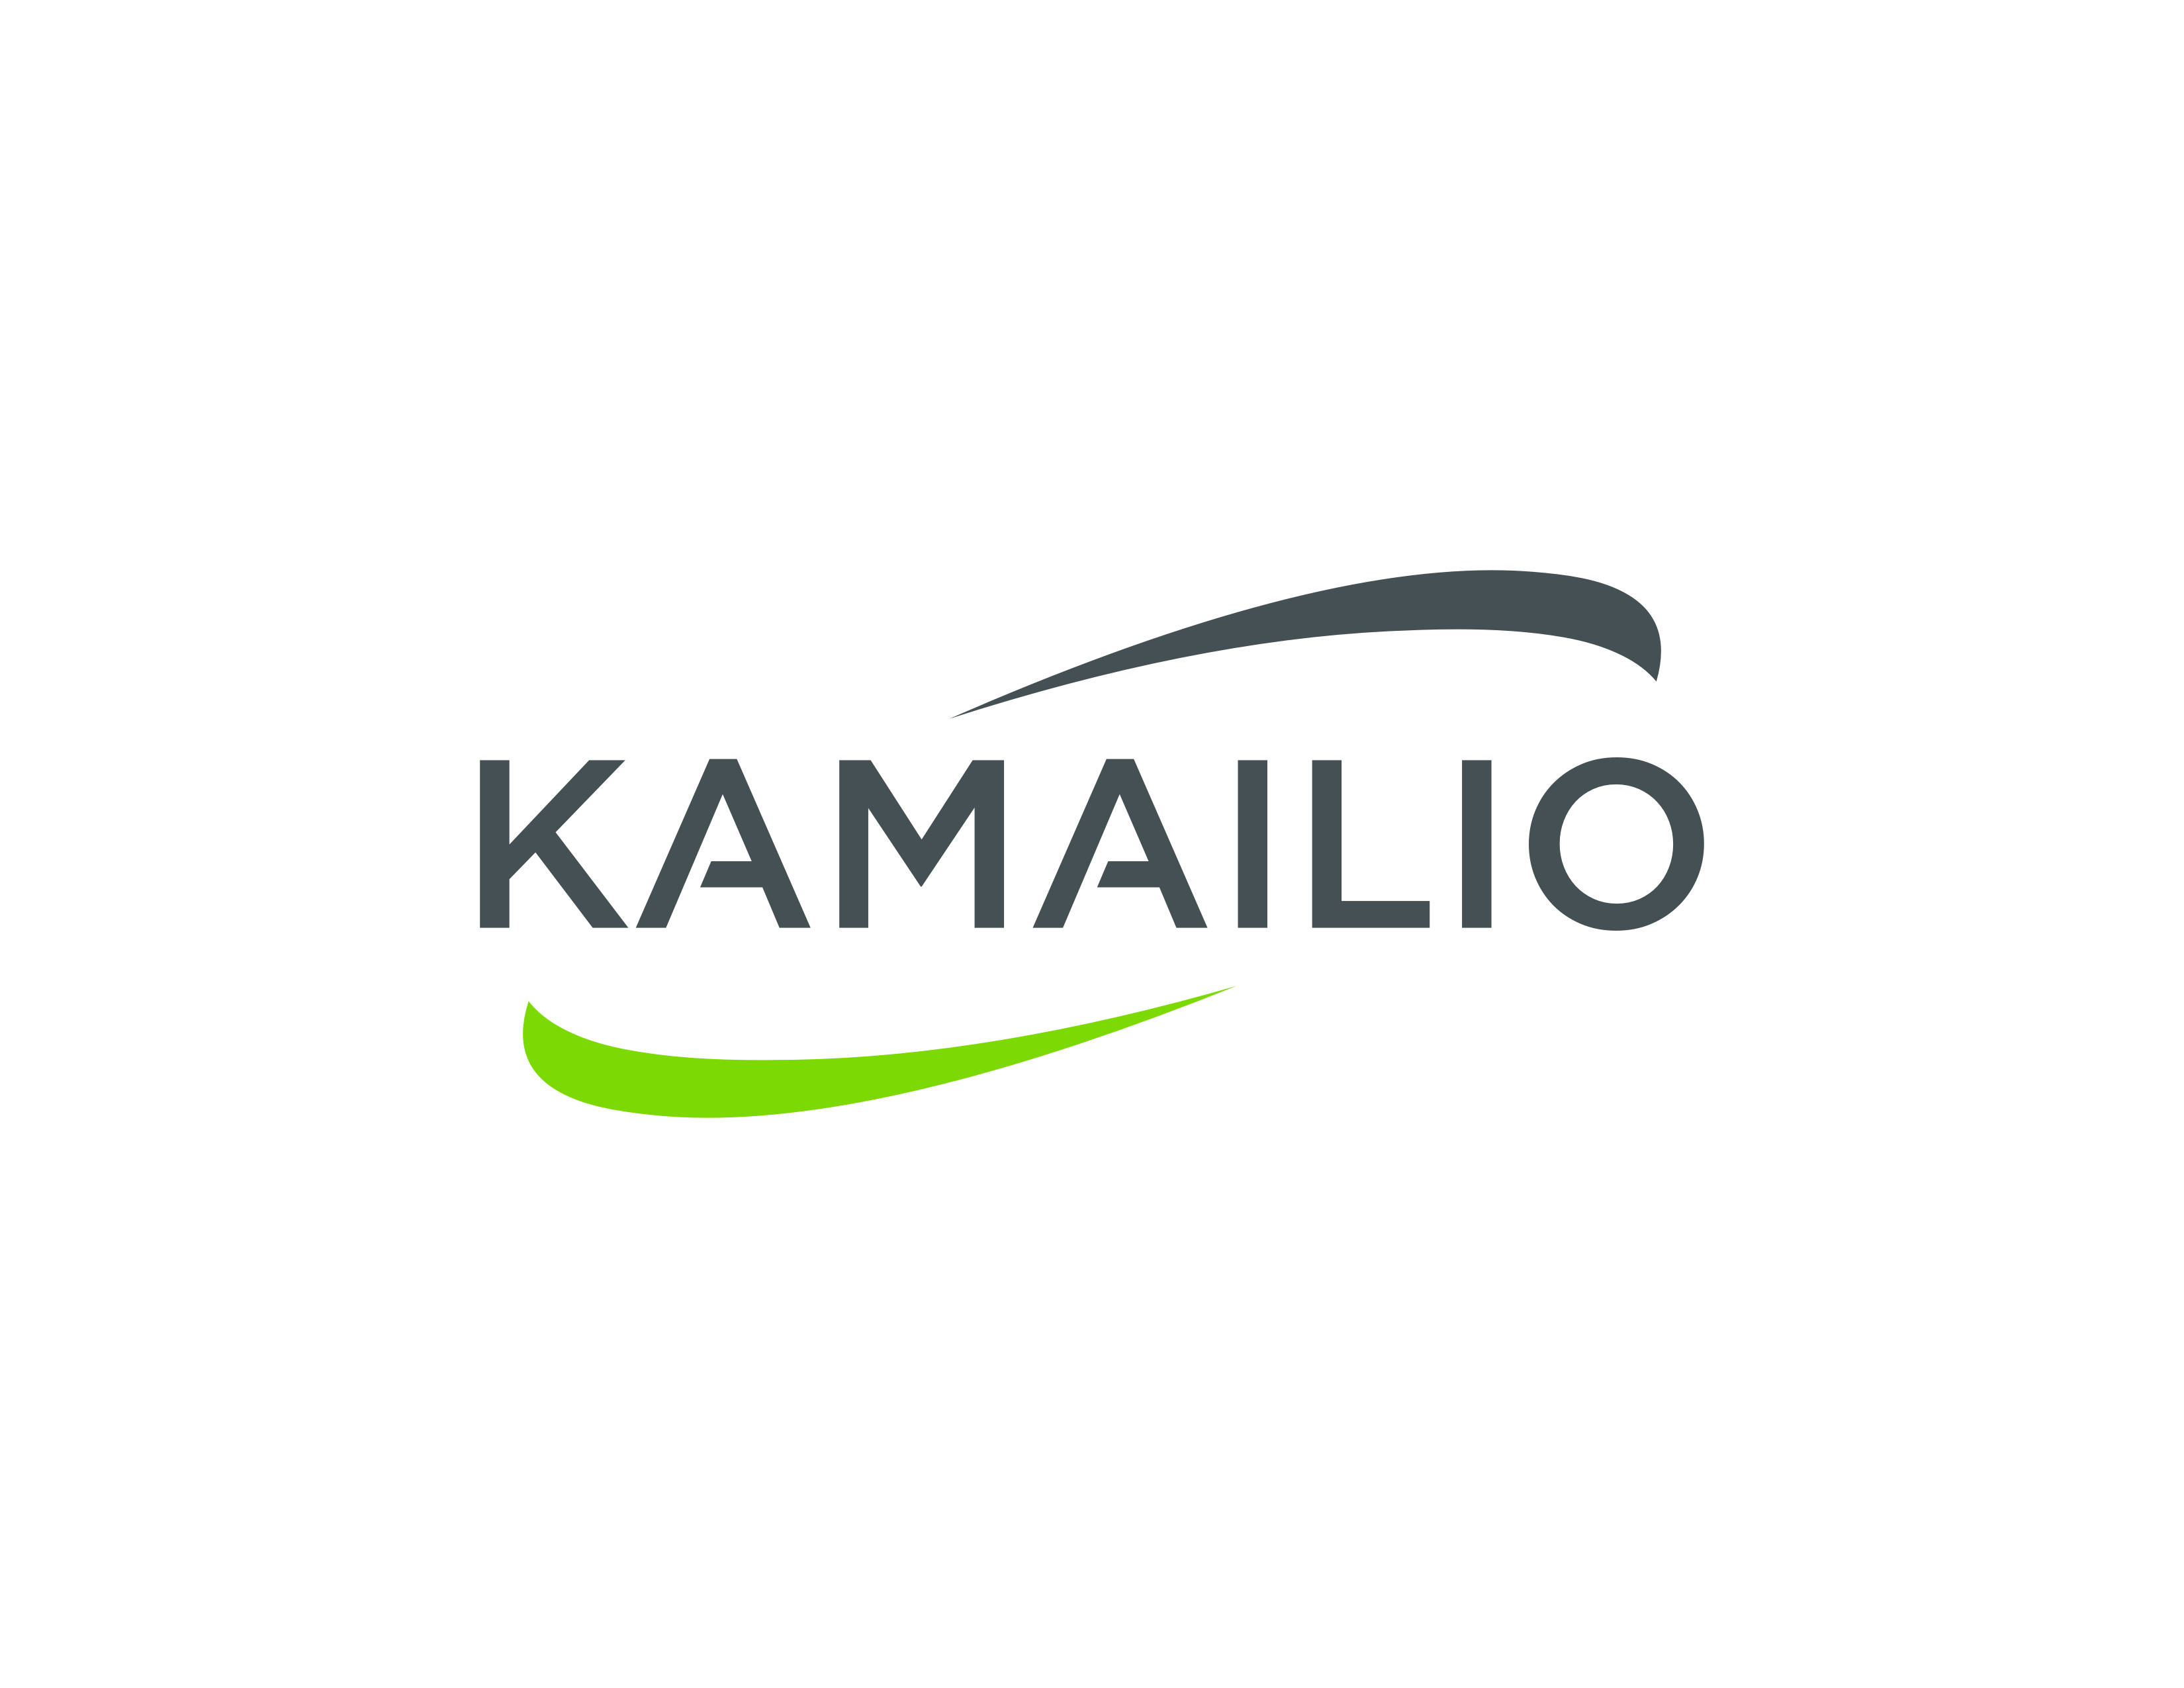 Kamailio Consulting and Support